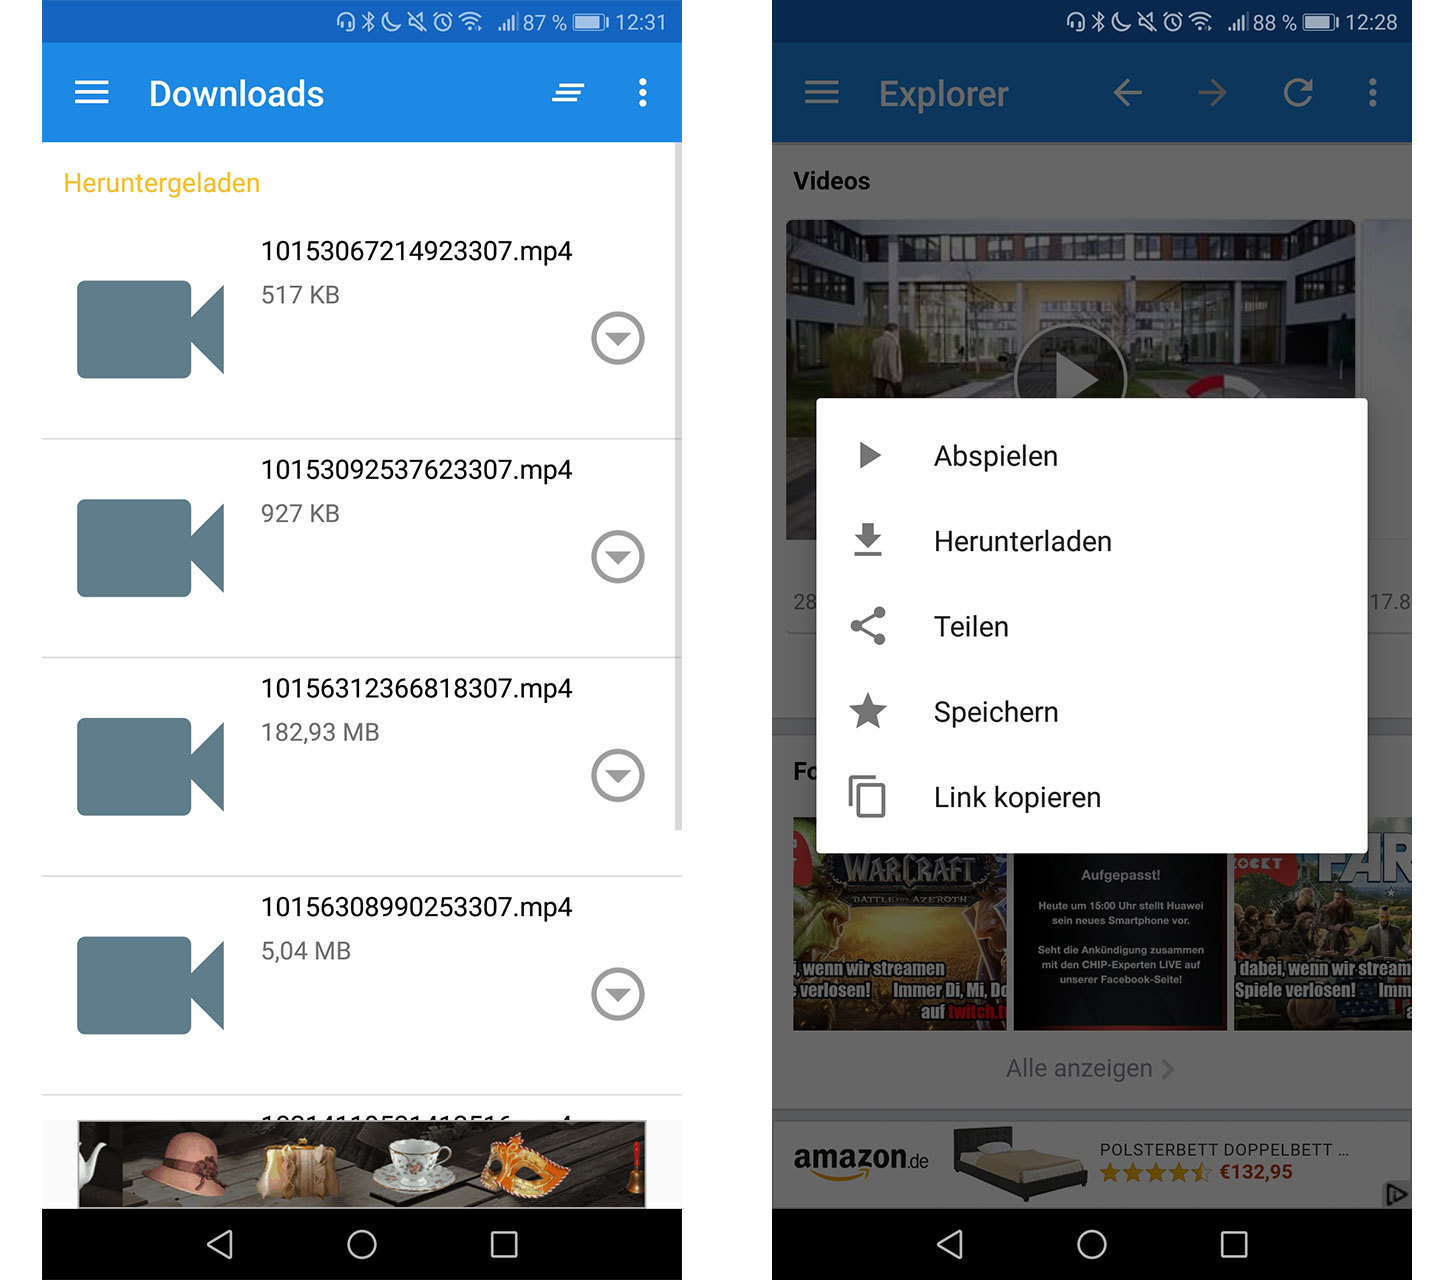 Facebook video download manager for android windows 7